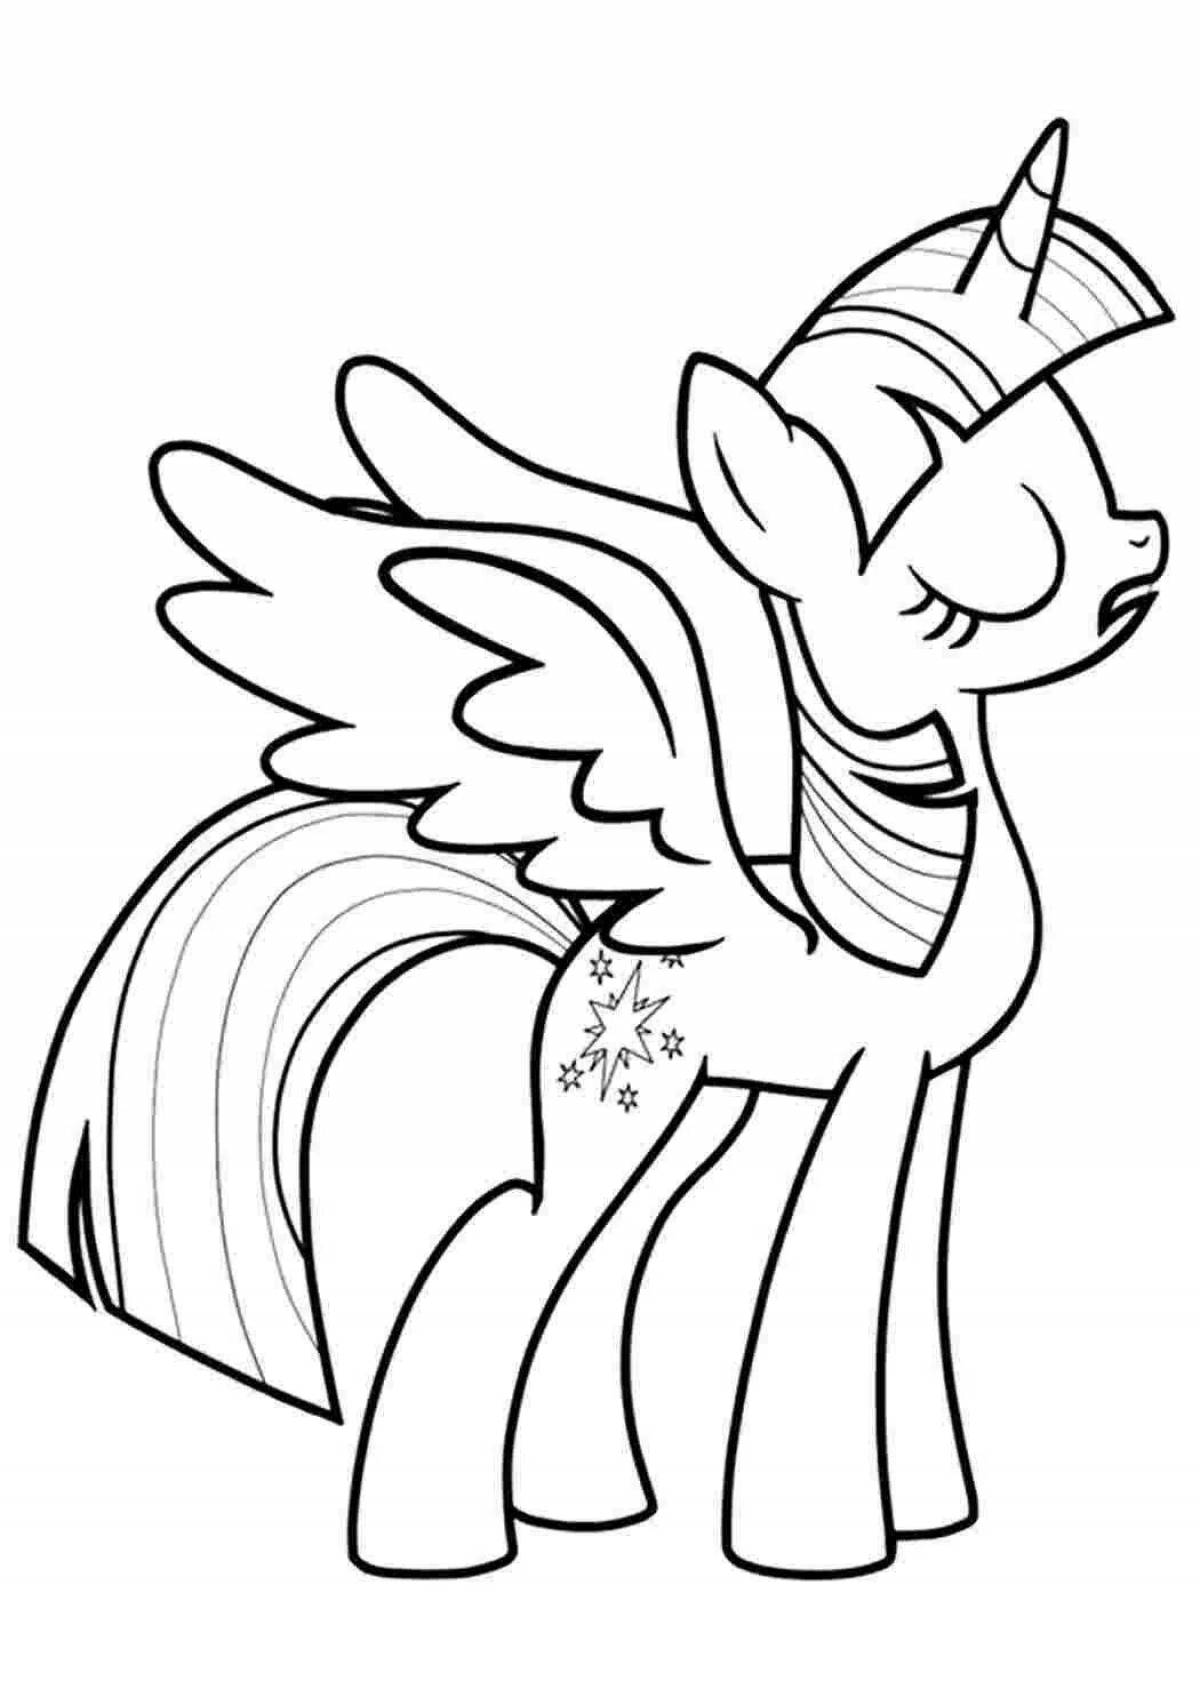 Beautiful twilight sparkle coloring page